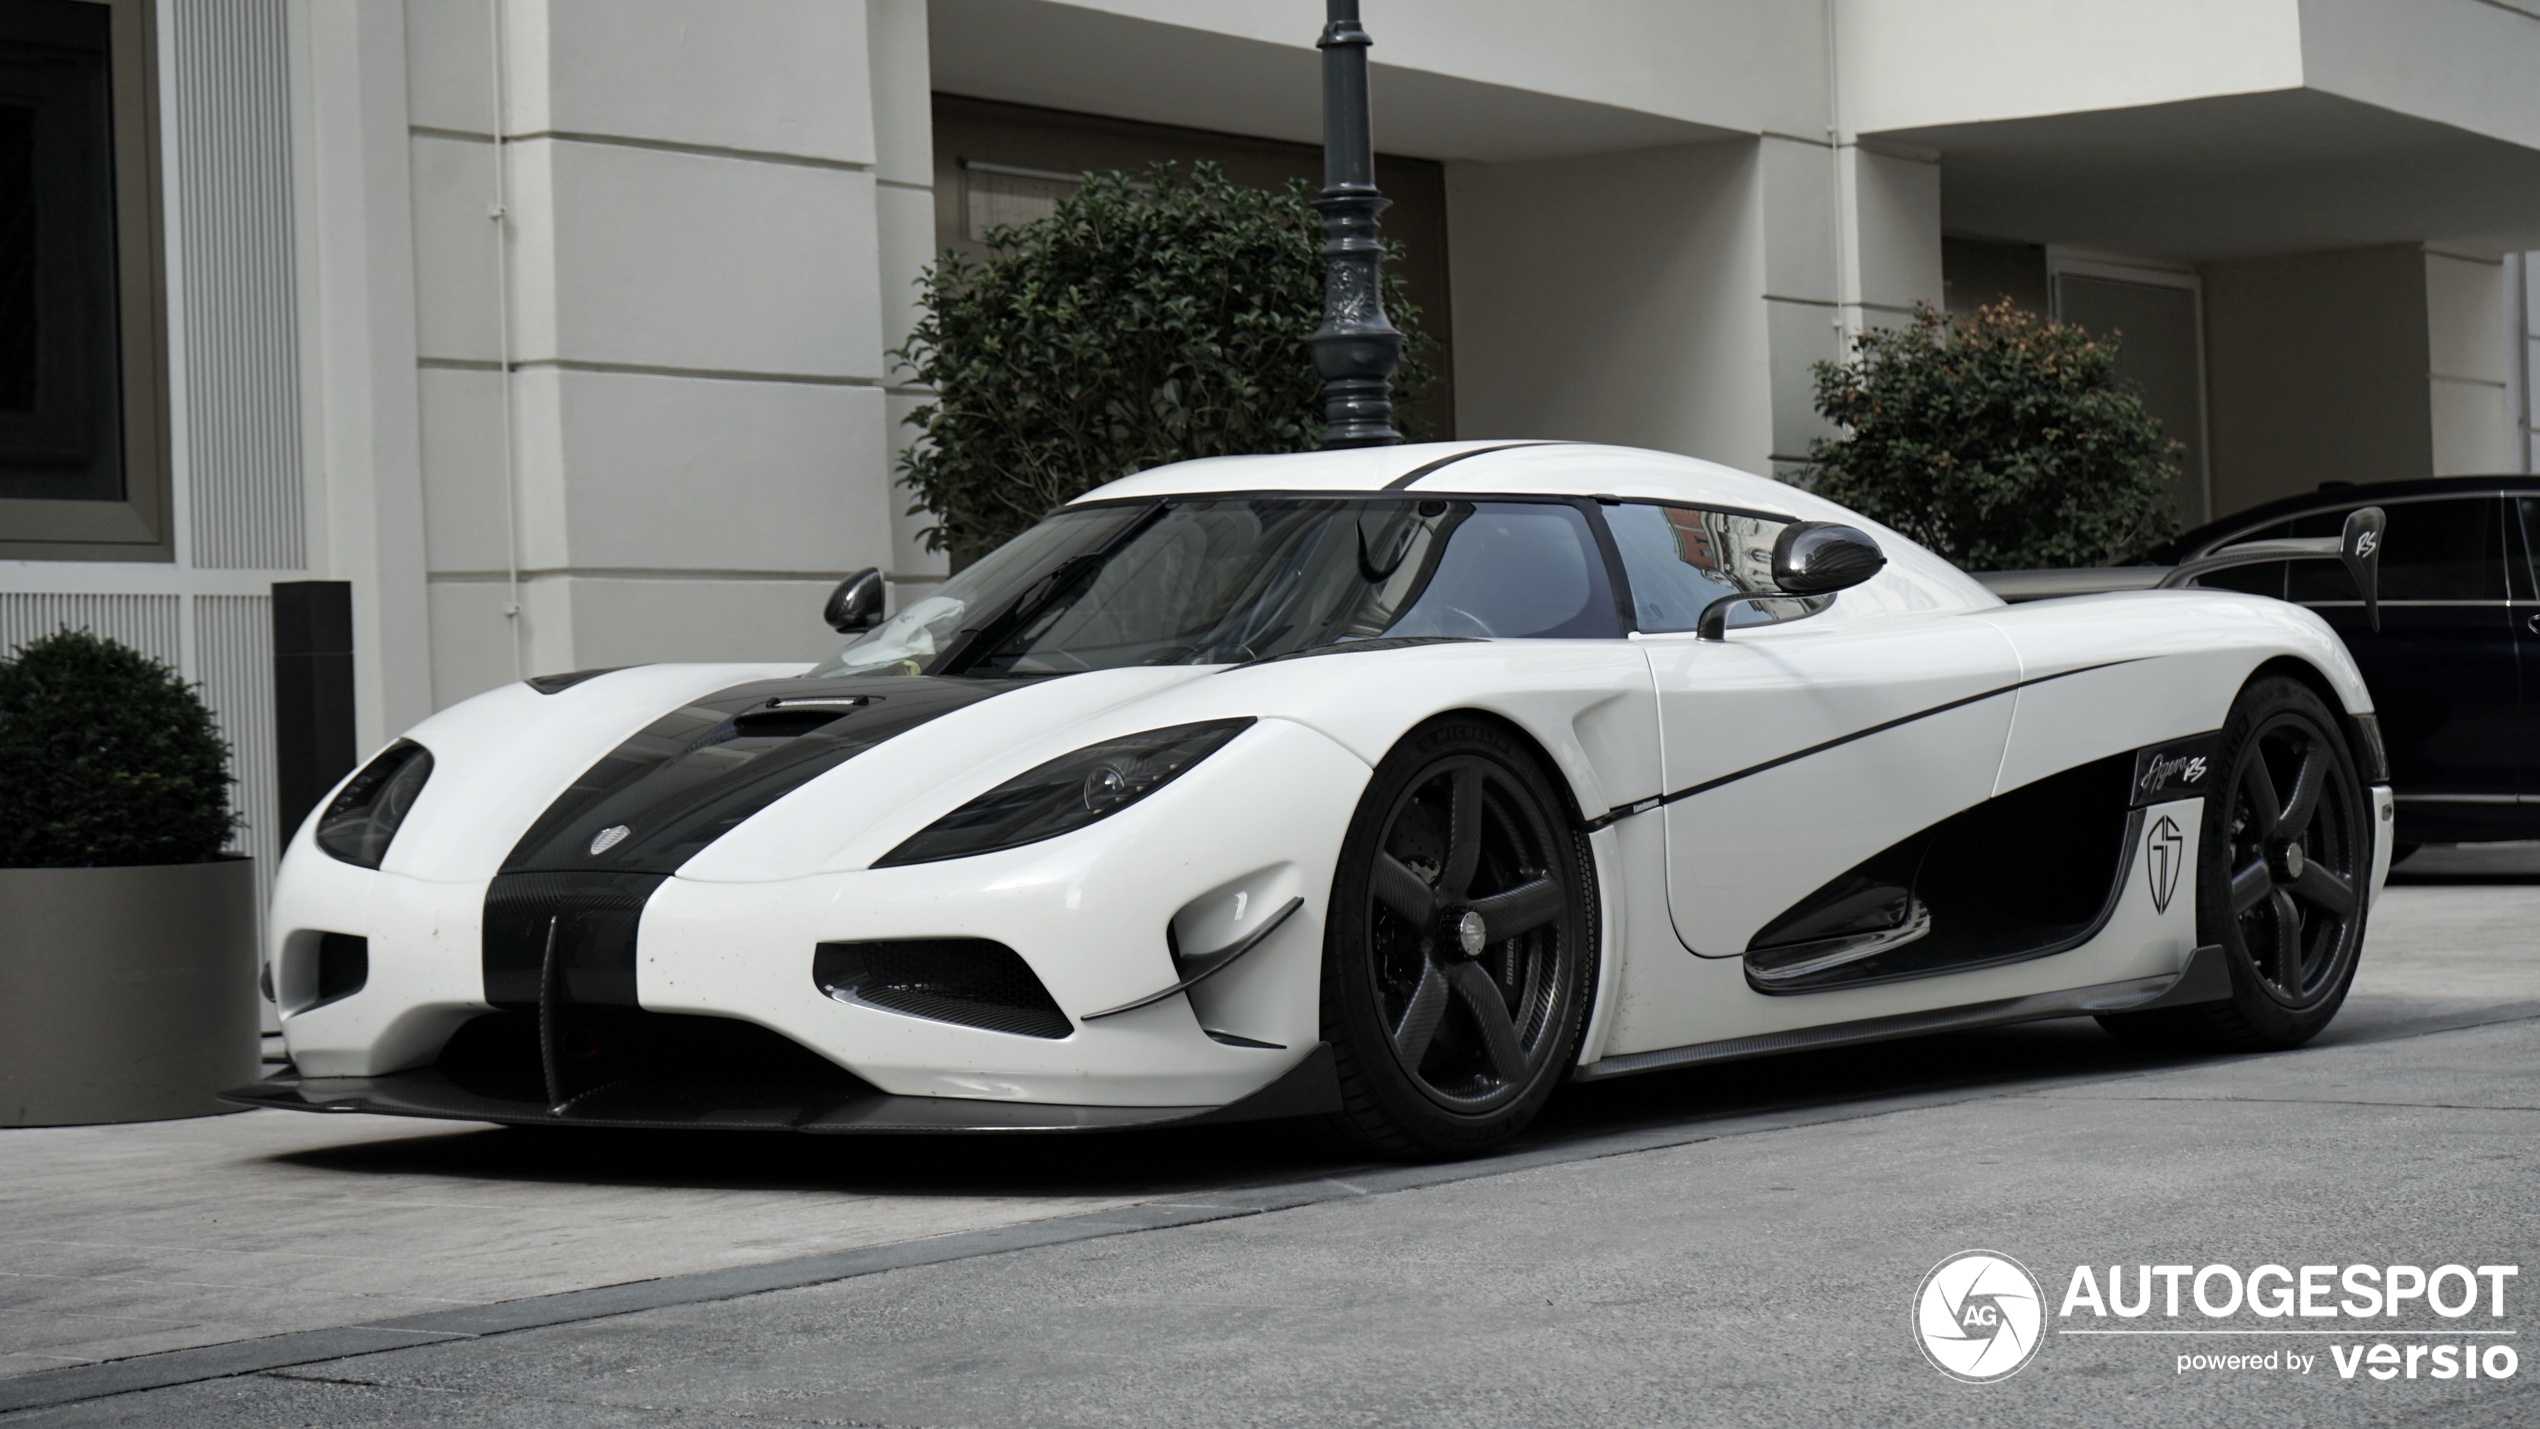 A beautiful Agera RS shows up in Vienna